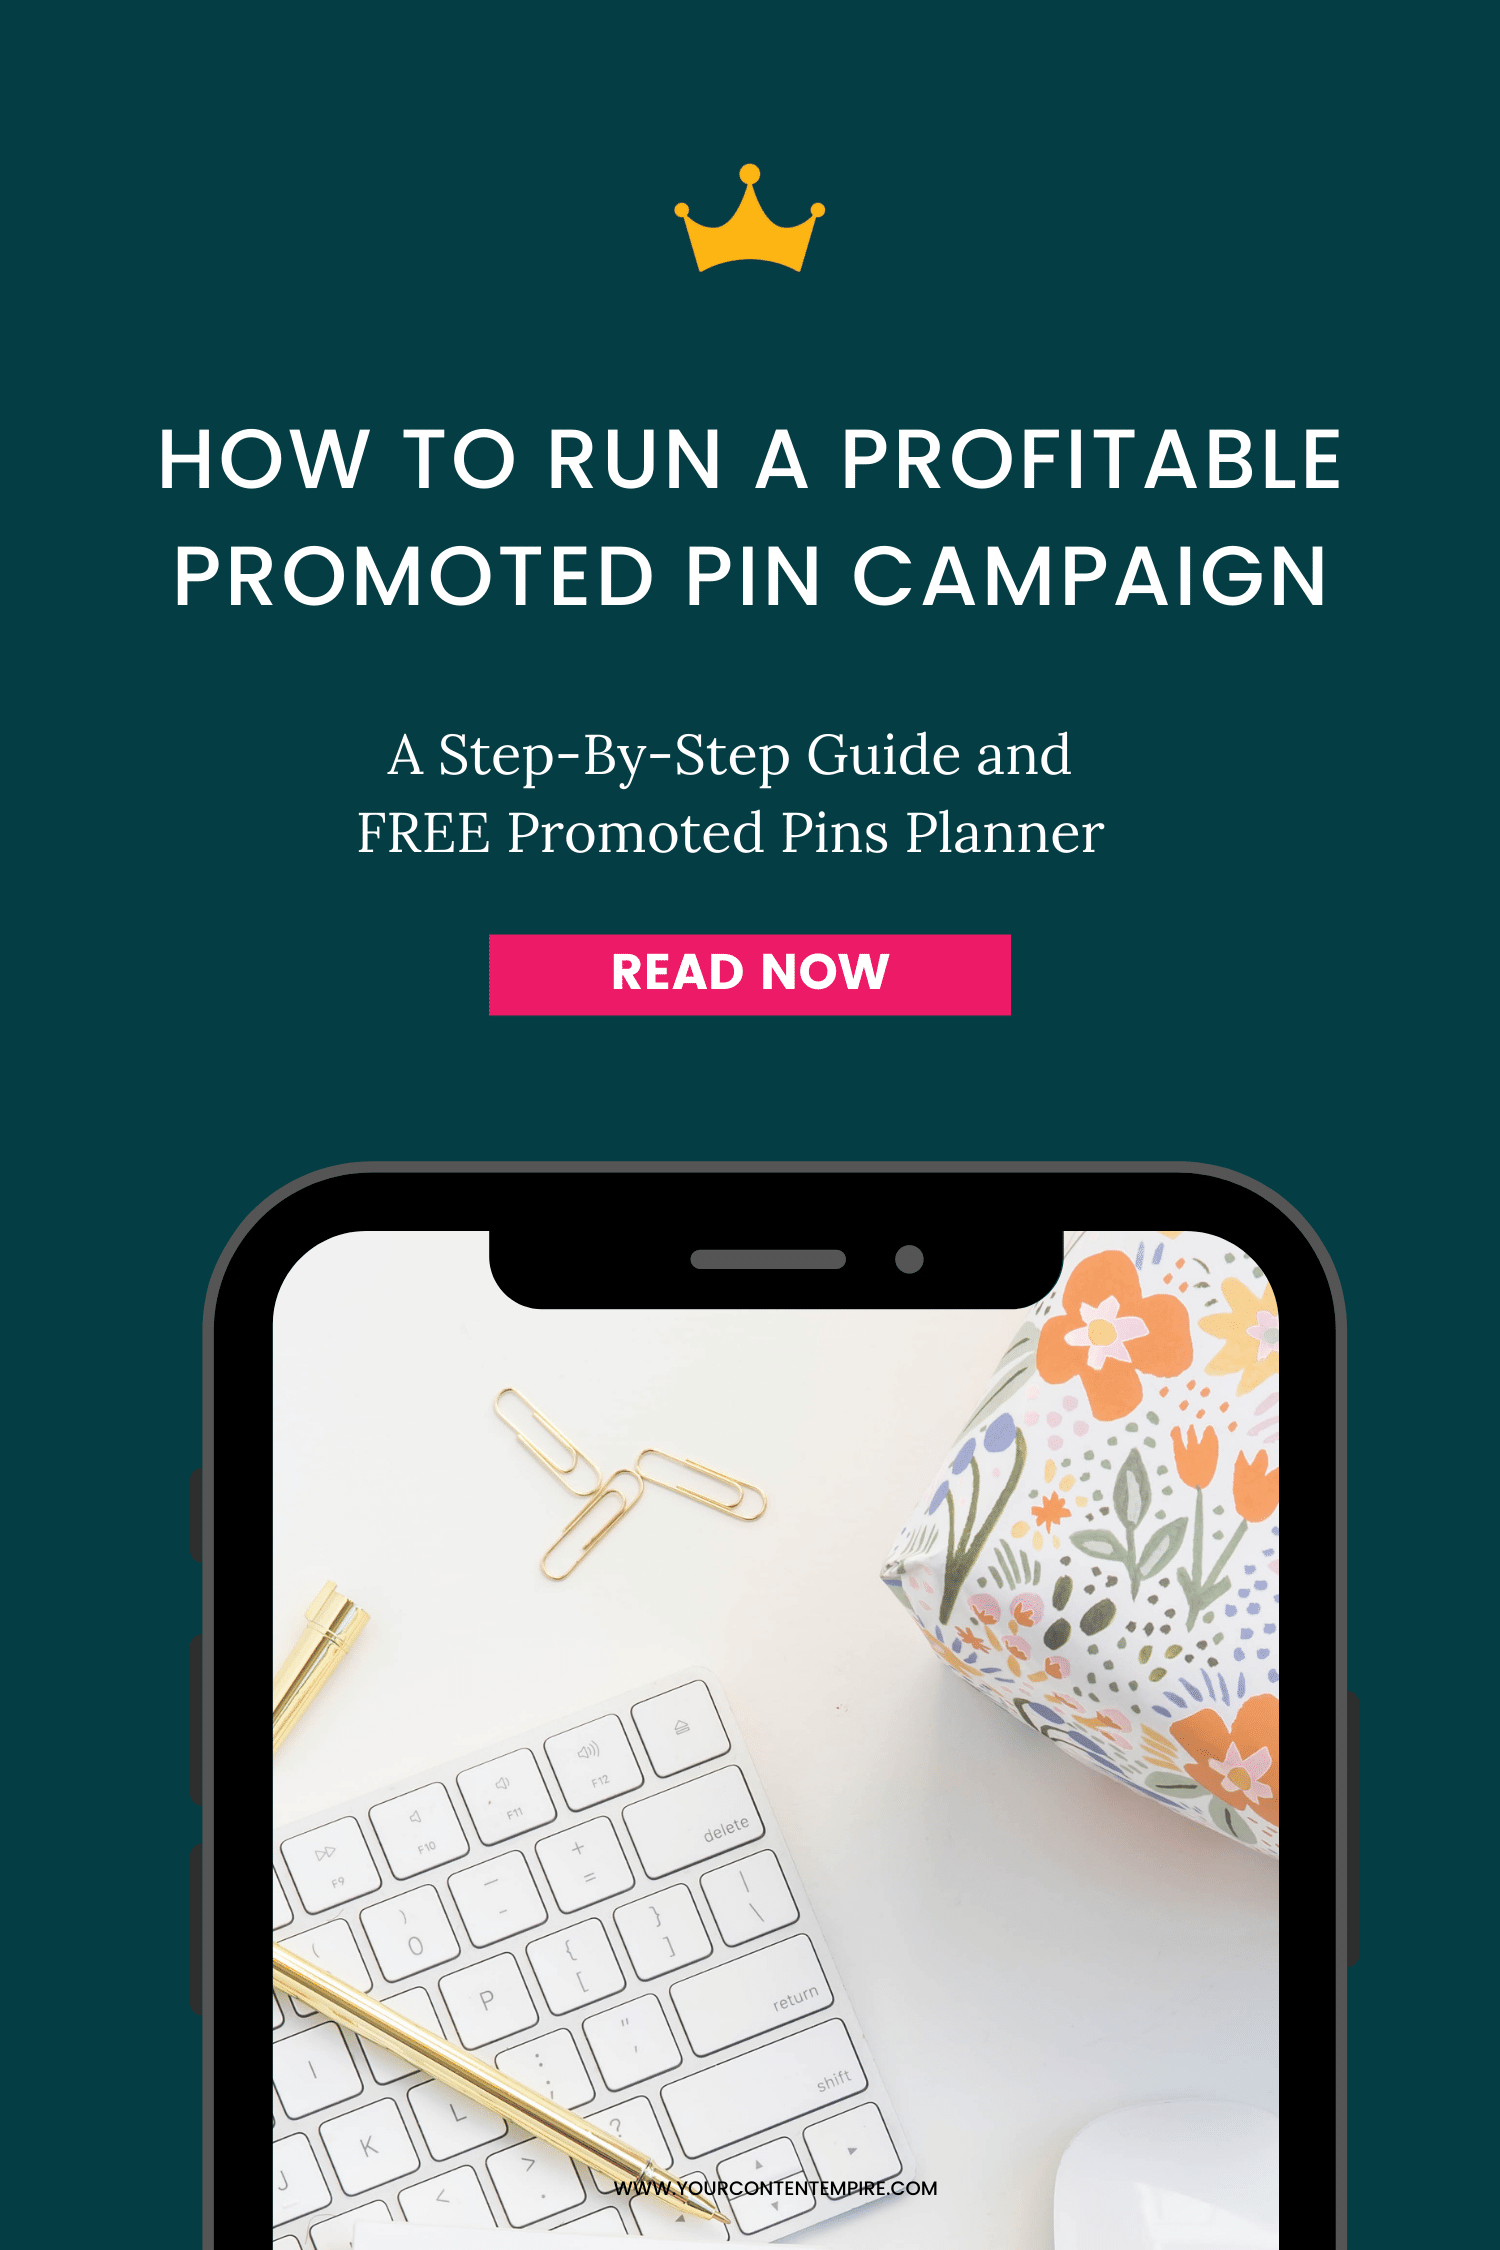 How to Run a Profitable Promoted Pin Campaign